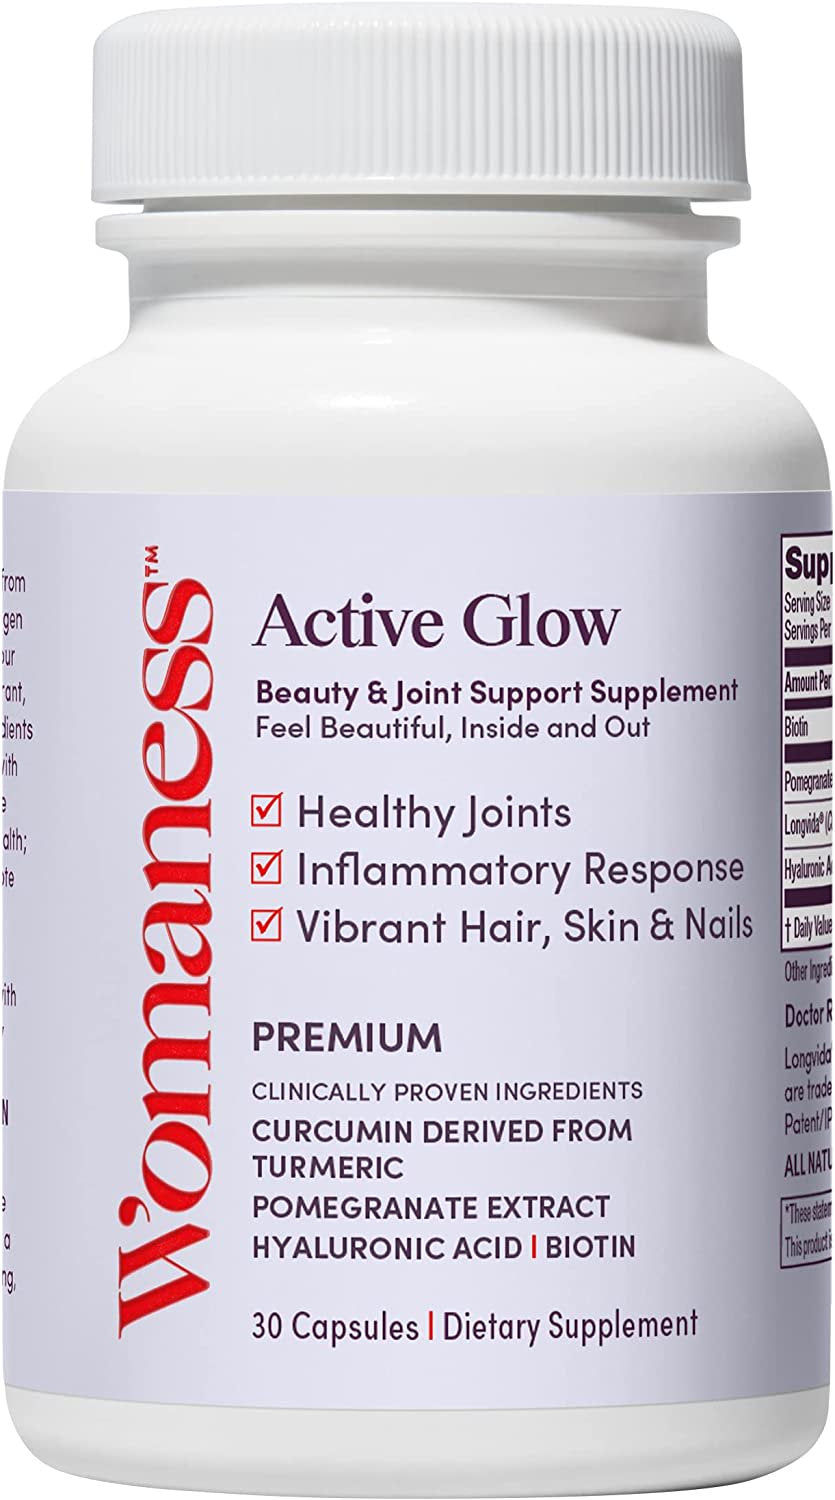 Womaness Active Glow - All over Menopause Support for Hair Skin and Nails Vitamins & Joint Health - Longvida Curcumin, Pomegranate Extract, Hyaluronic Acid + Biotin Menopause Supplements (30 Capsules)